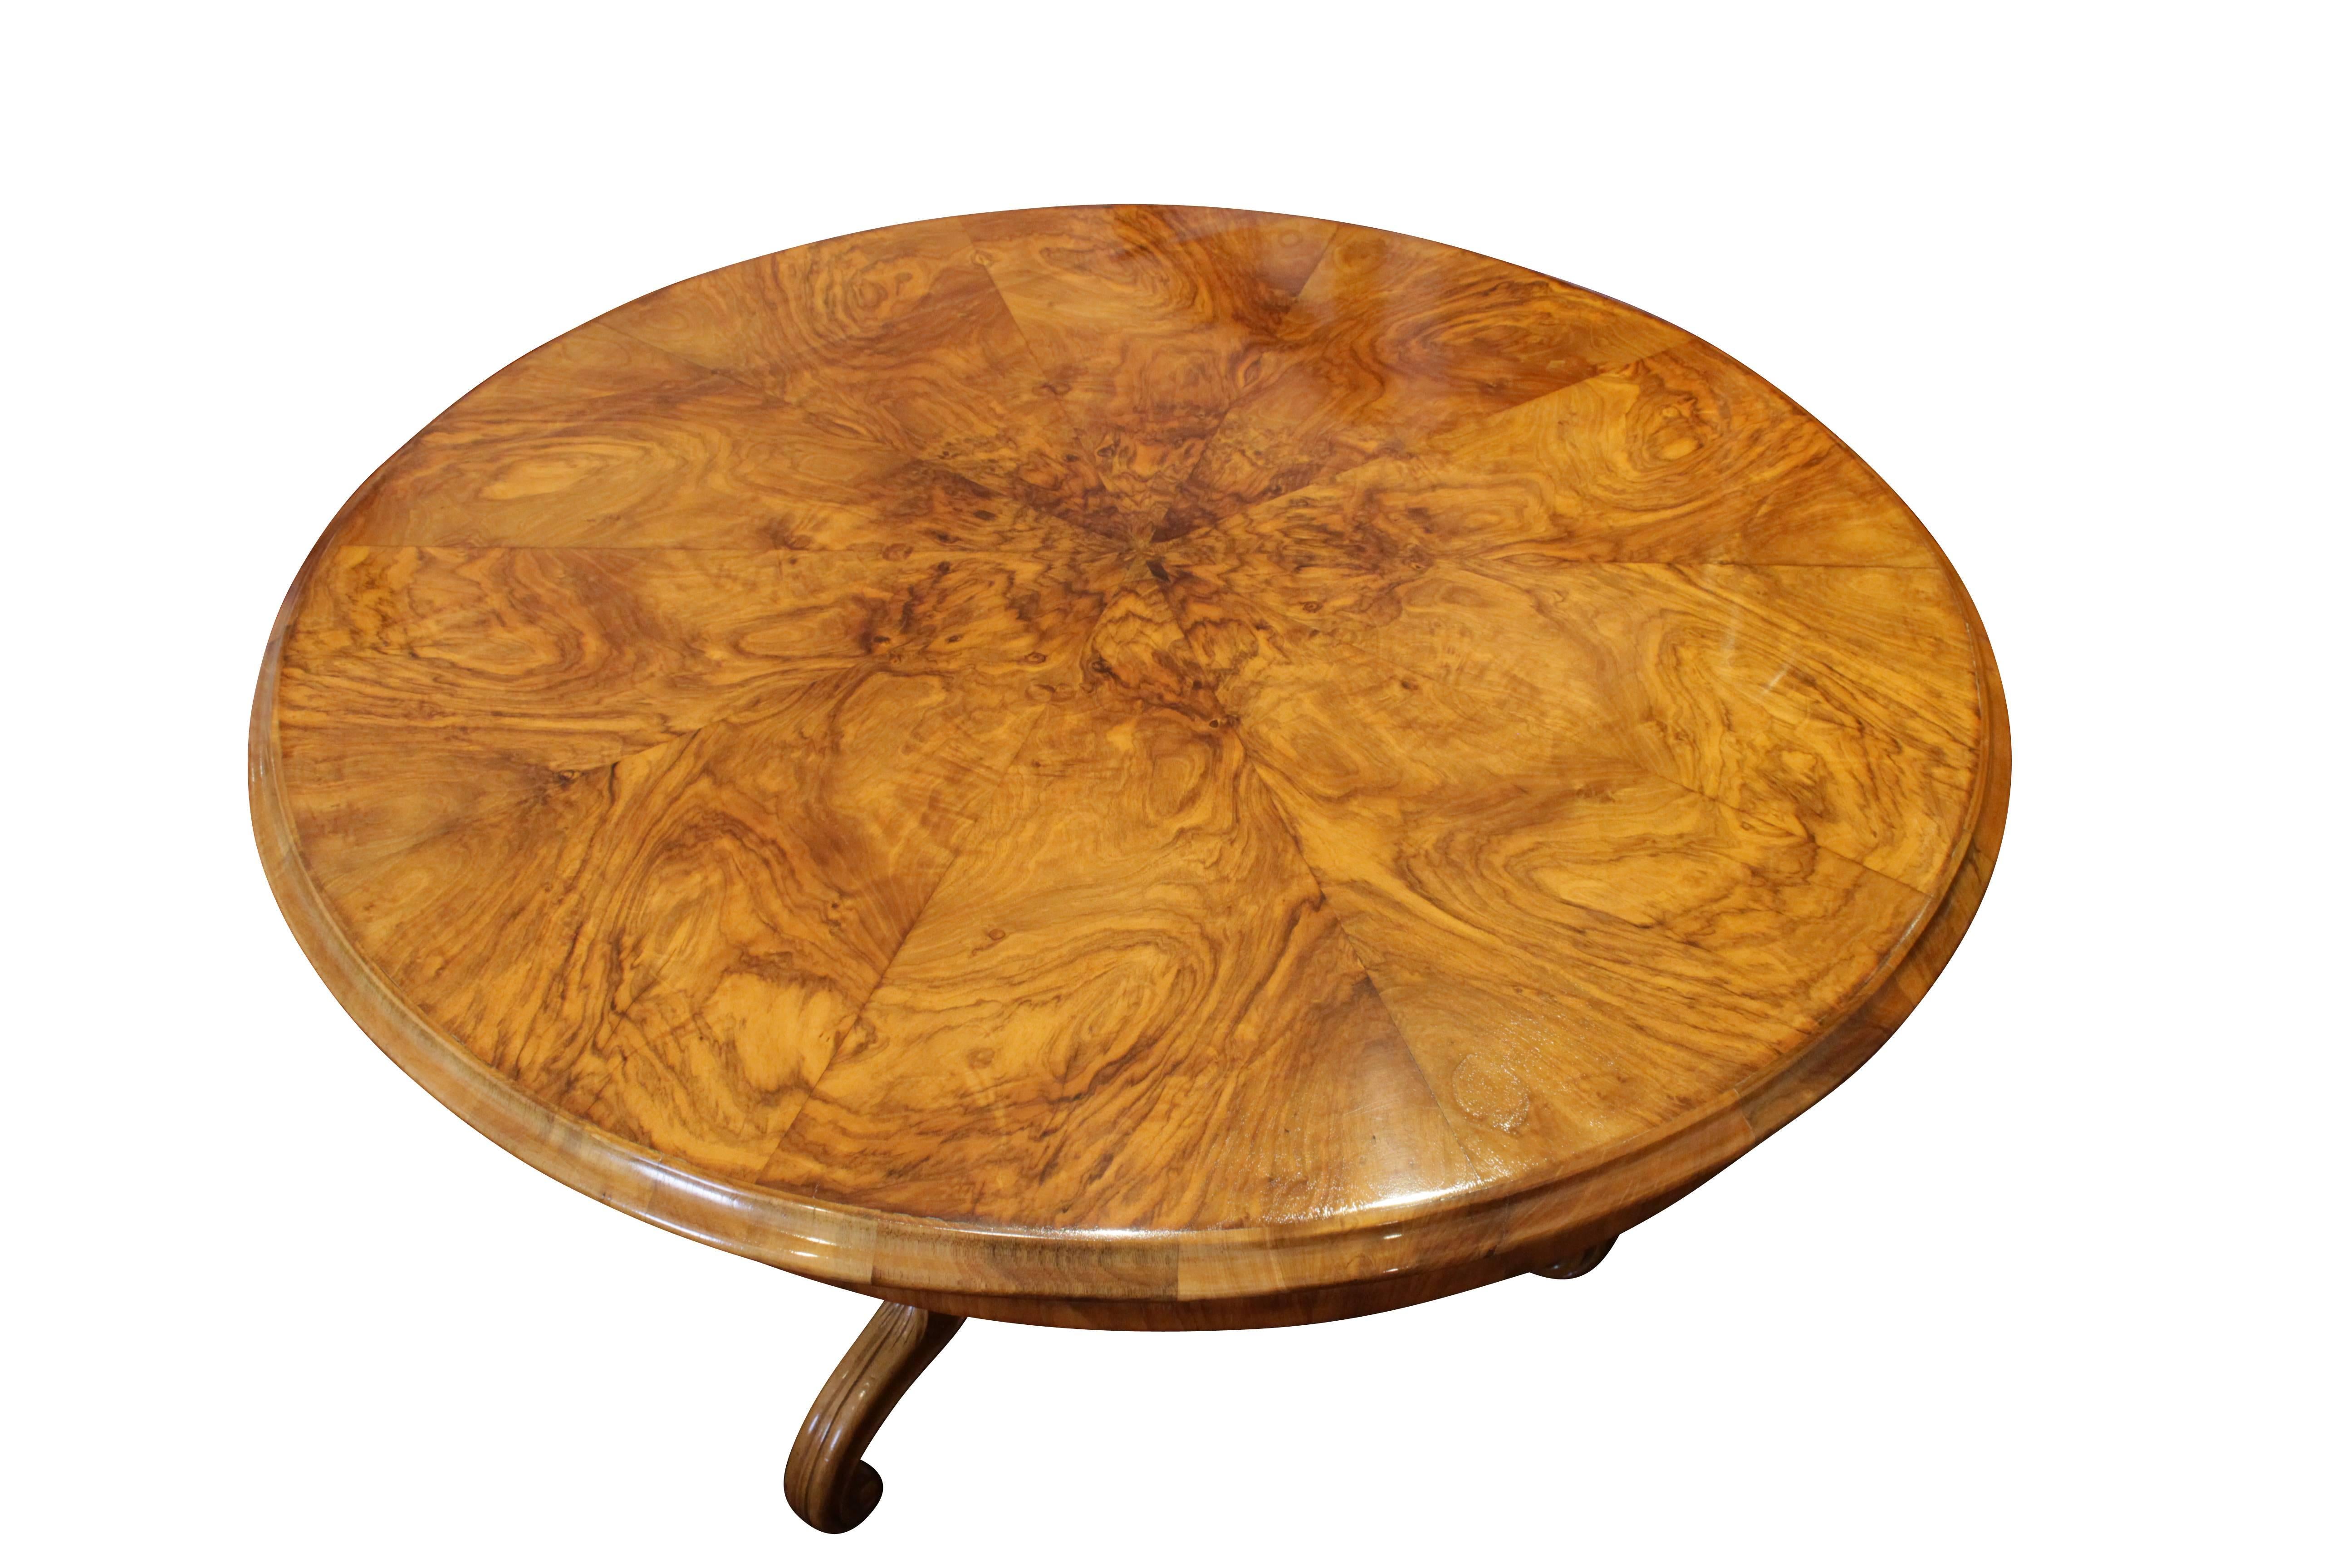 Very nice big Biedermeier center table. The table is made of walnut (foot solid, slab veneered). The table is in a very good restored condition.